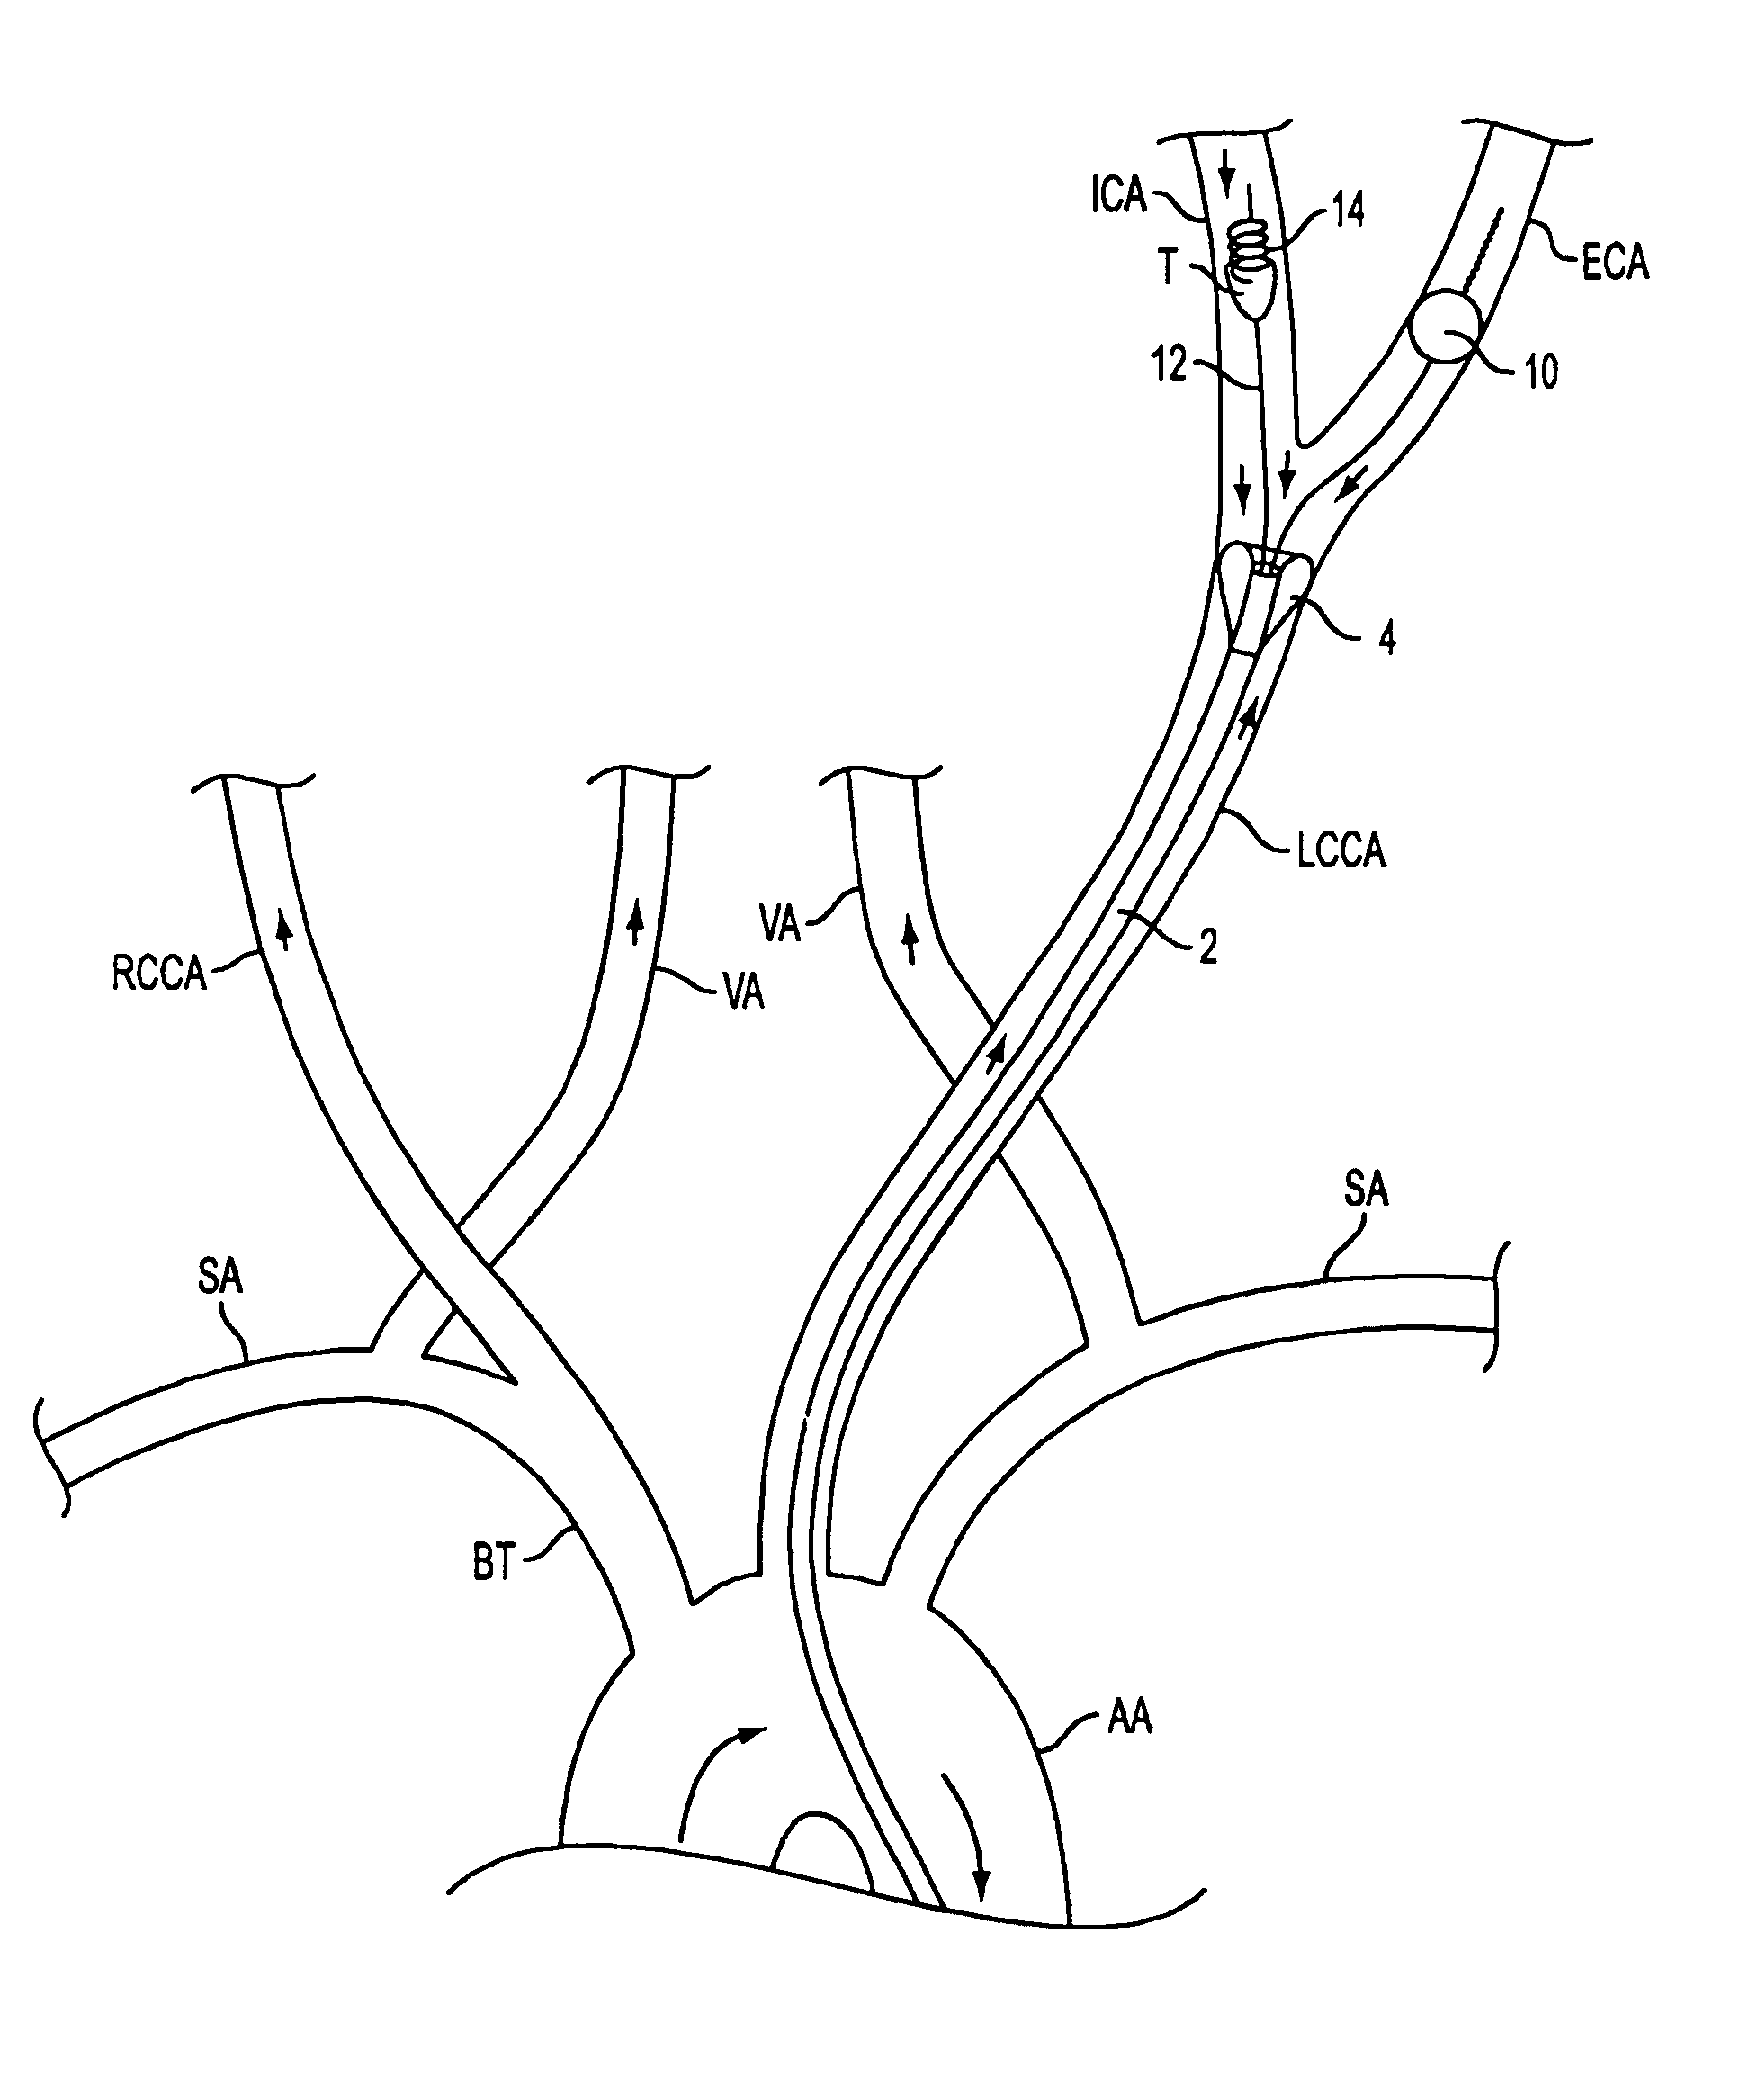 Apparatus and methods for treating stroke and controlling cerebral flow characteristics